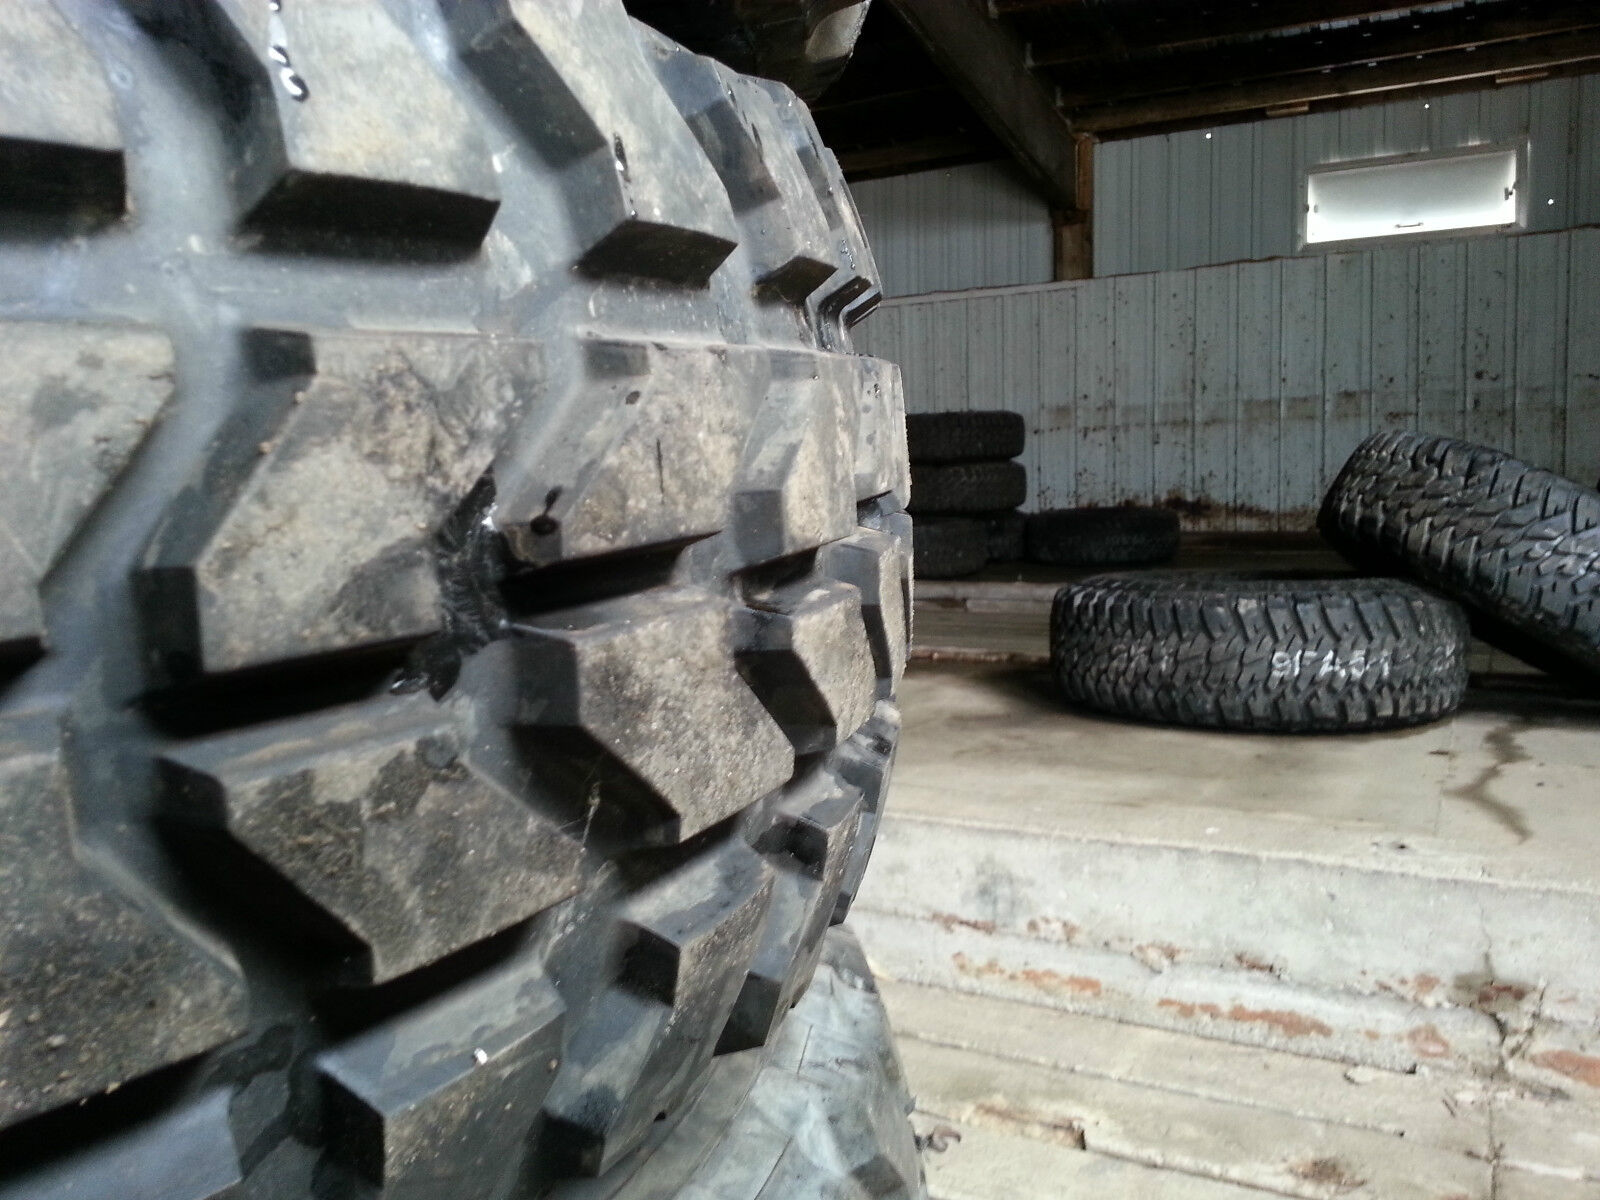 4 GOODYEAR WRANGLER MT OZ  MILITARY H1 HUMMER HUMVEE TIRES 90%  TREAD Parts for Sale 